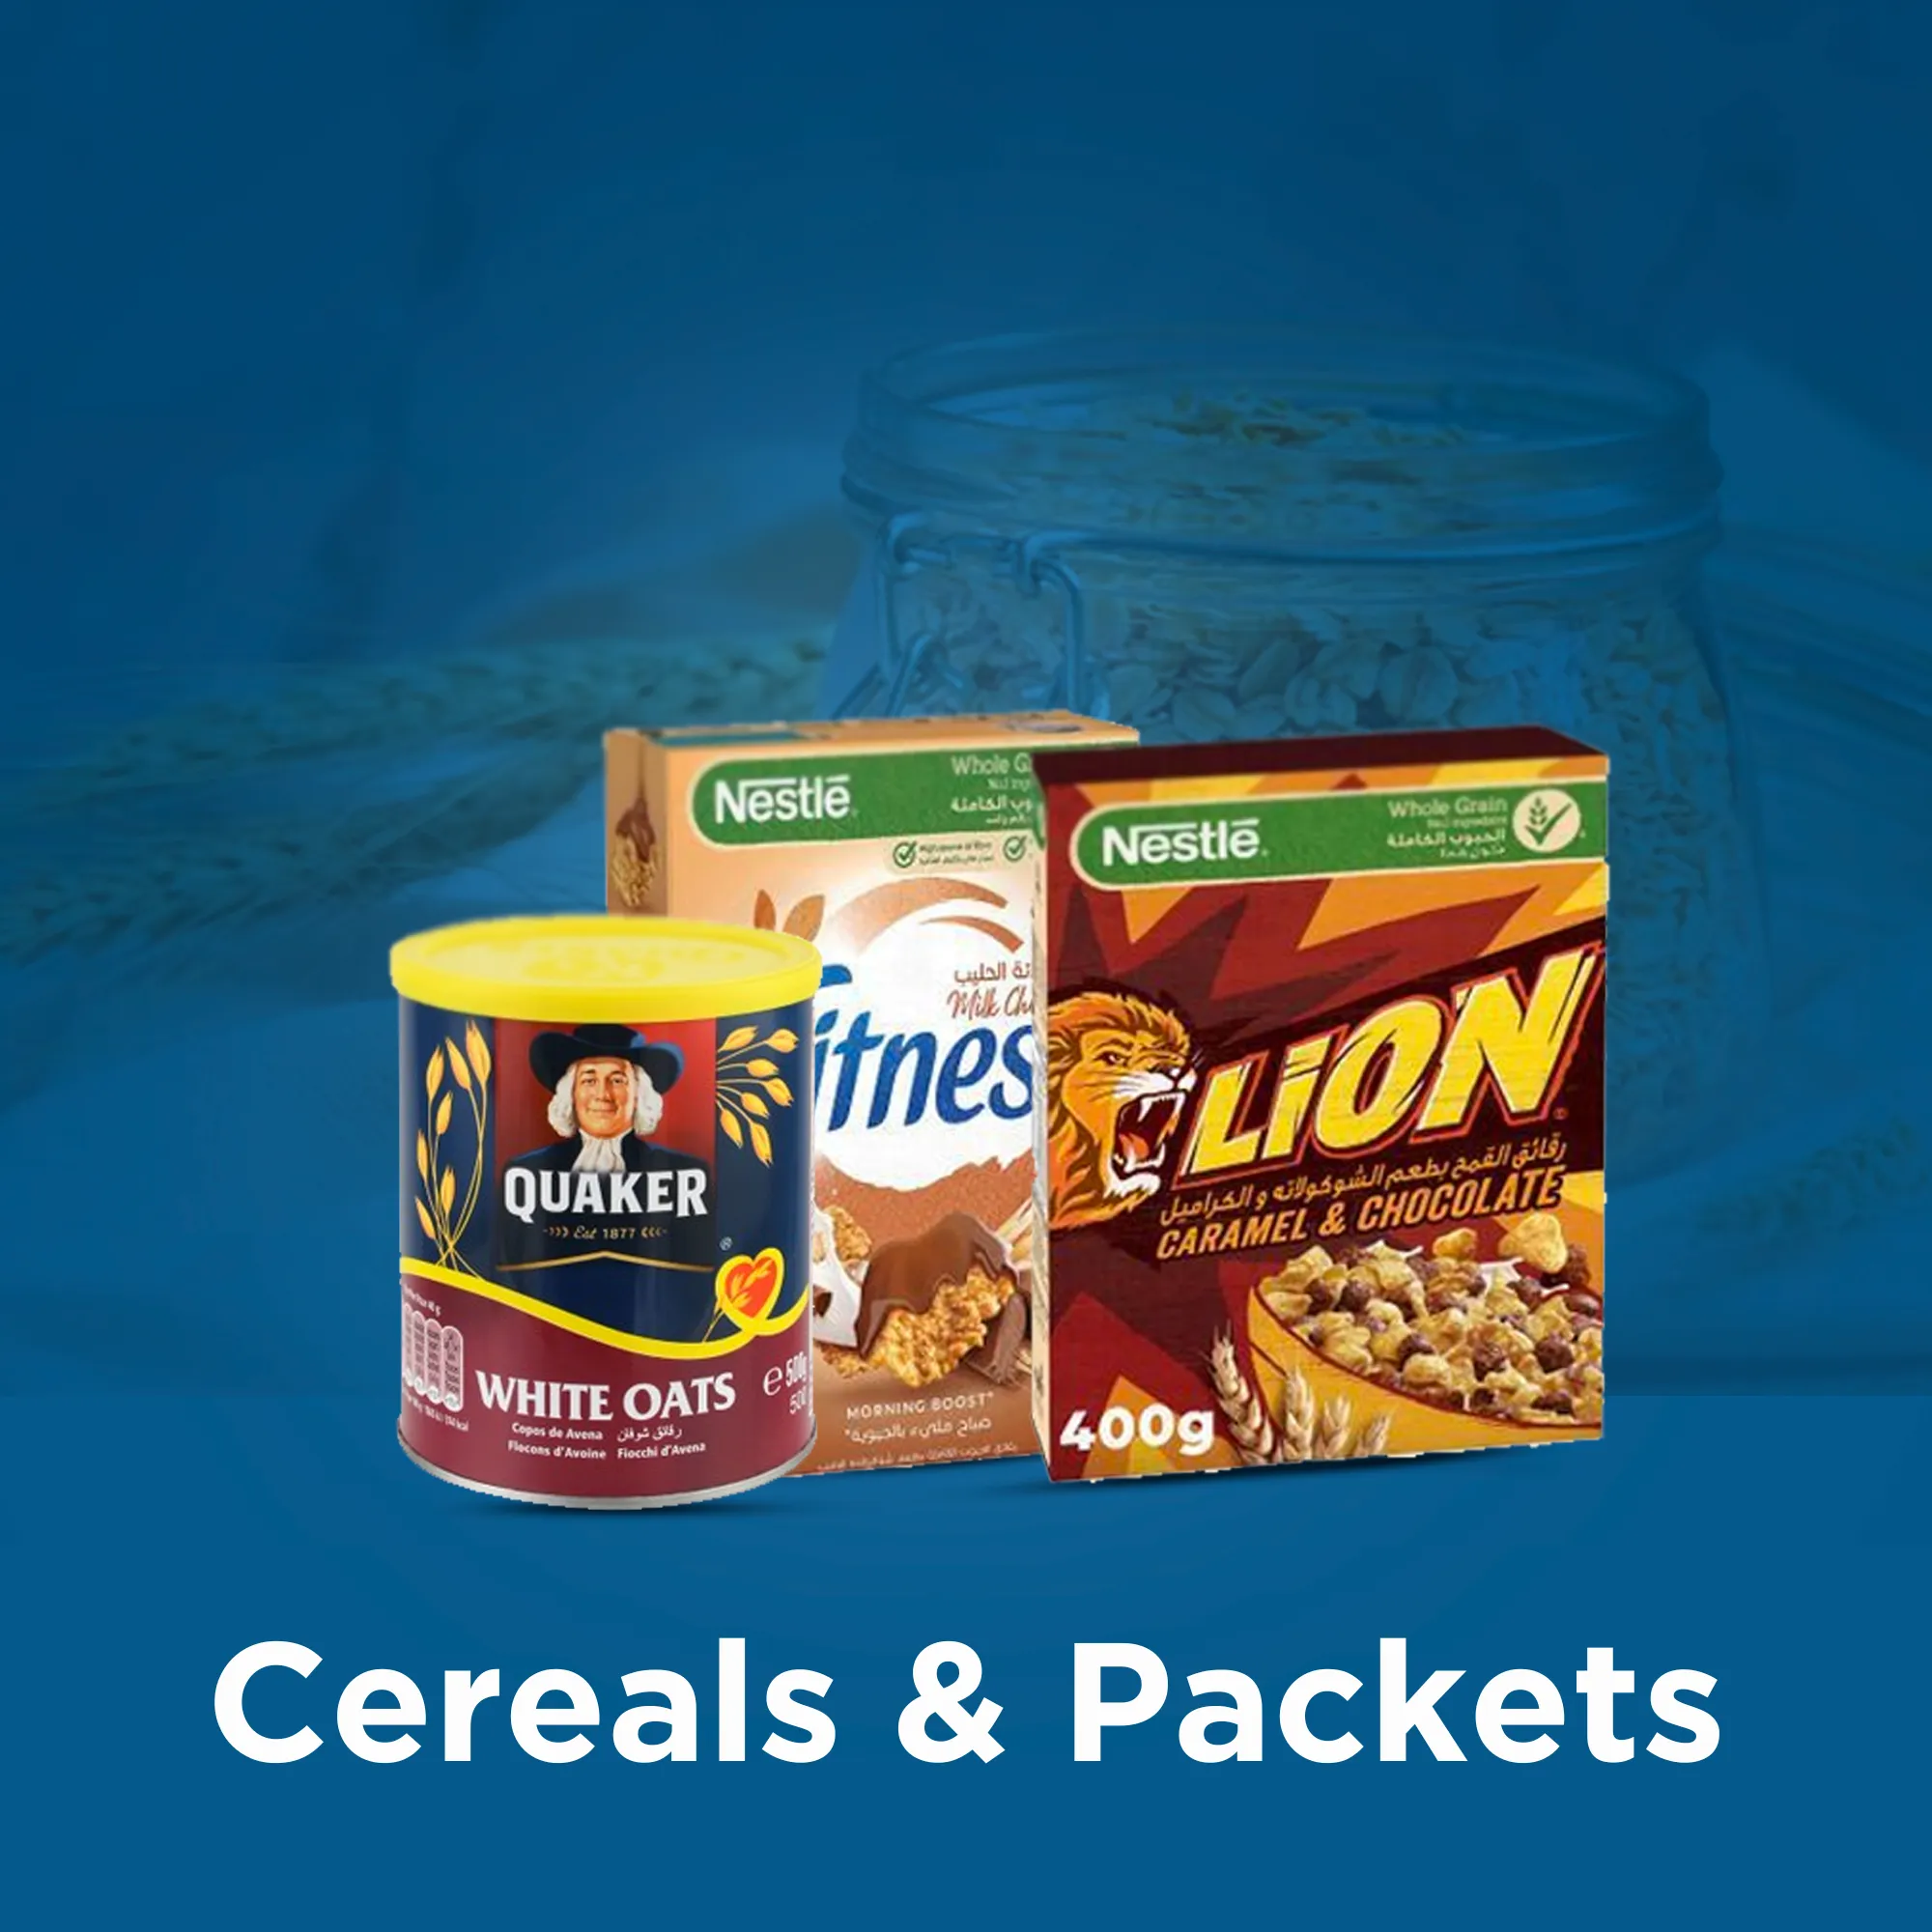 Cereals & Packets